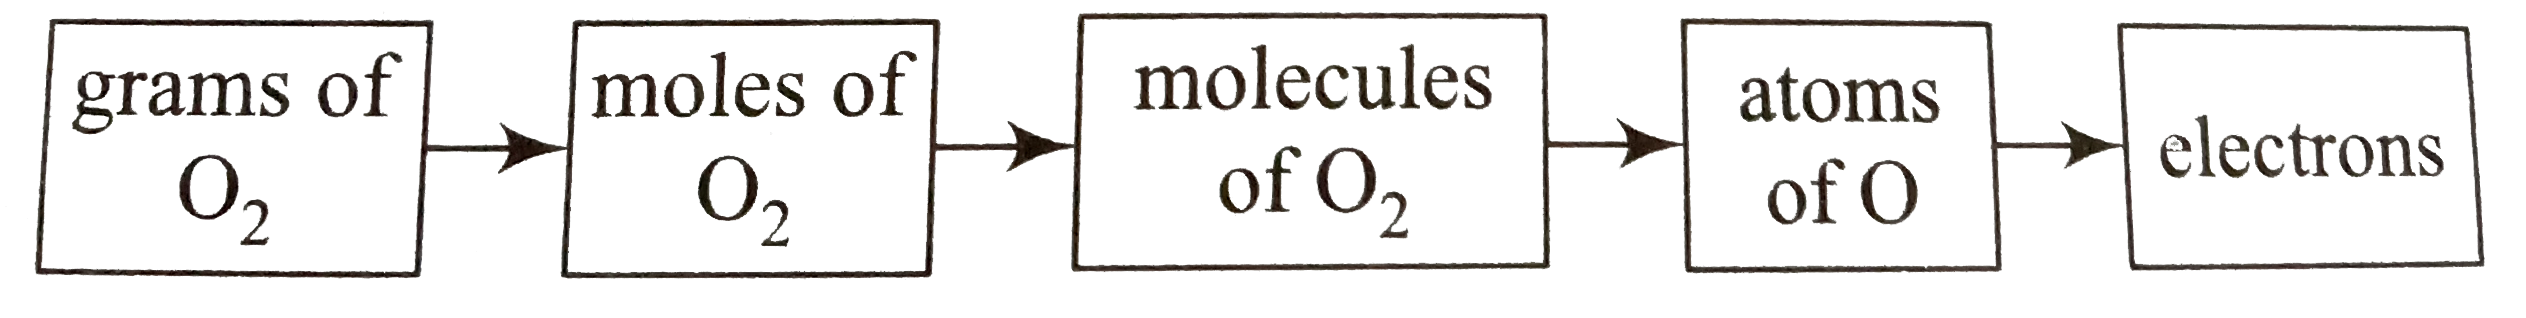 Mole conept: Calculate the follwing  in 48g of oxygen gas  (diaxygen) at room temperature (25^(@) C): (i) moles  of O(2), (Ii) number of O(2) molecules, (iii) number of O atoms, and  (iv) number of electrons.    Strategy: The molecular mass of dioxygen (O(2)) is 32 muThus, its molar mass is  32.0g mol^(-1), Now, use the  needed information:    (a) one mole of O(2) contains Avogadro's number of O(2)  molecules,   (b) one O(2) molecules  contains  2 oxygen  atons, and (c) one oxygen  atom contains 8 electrons.